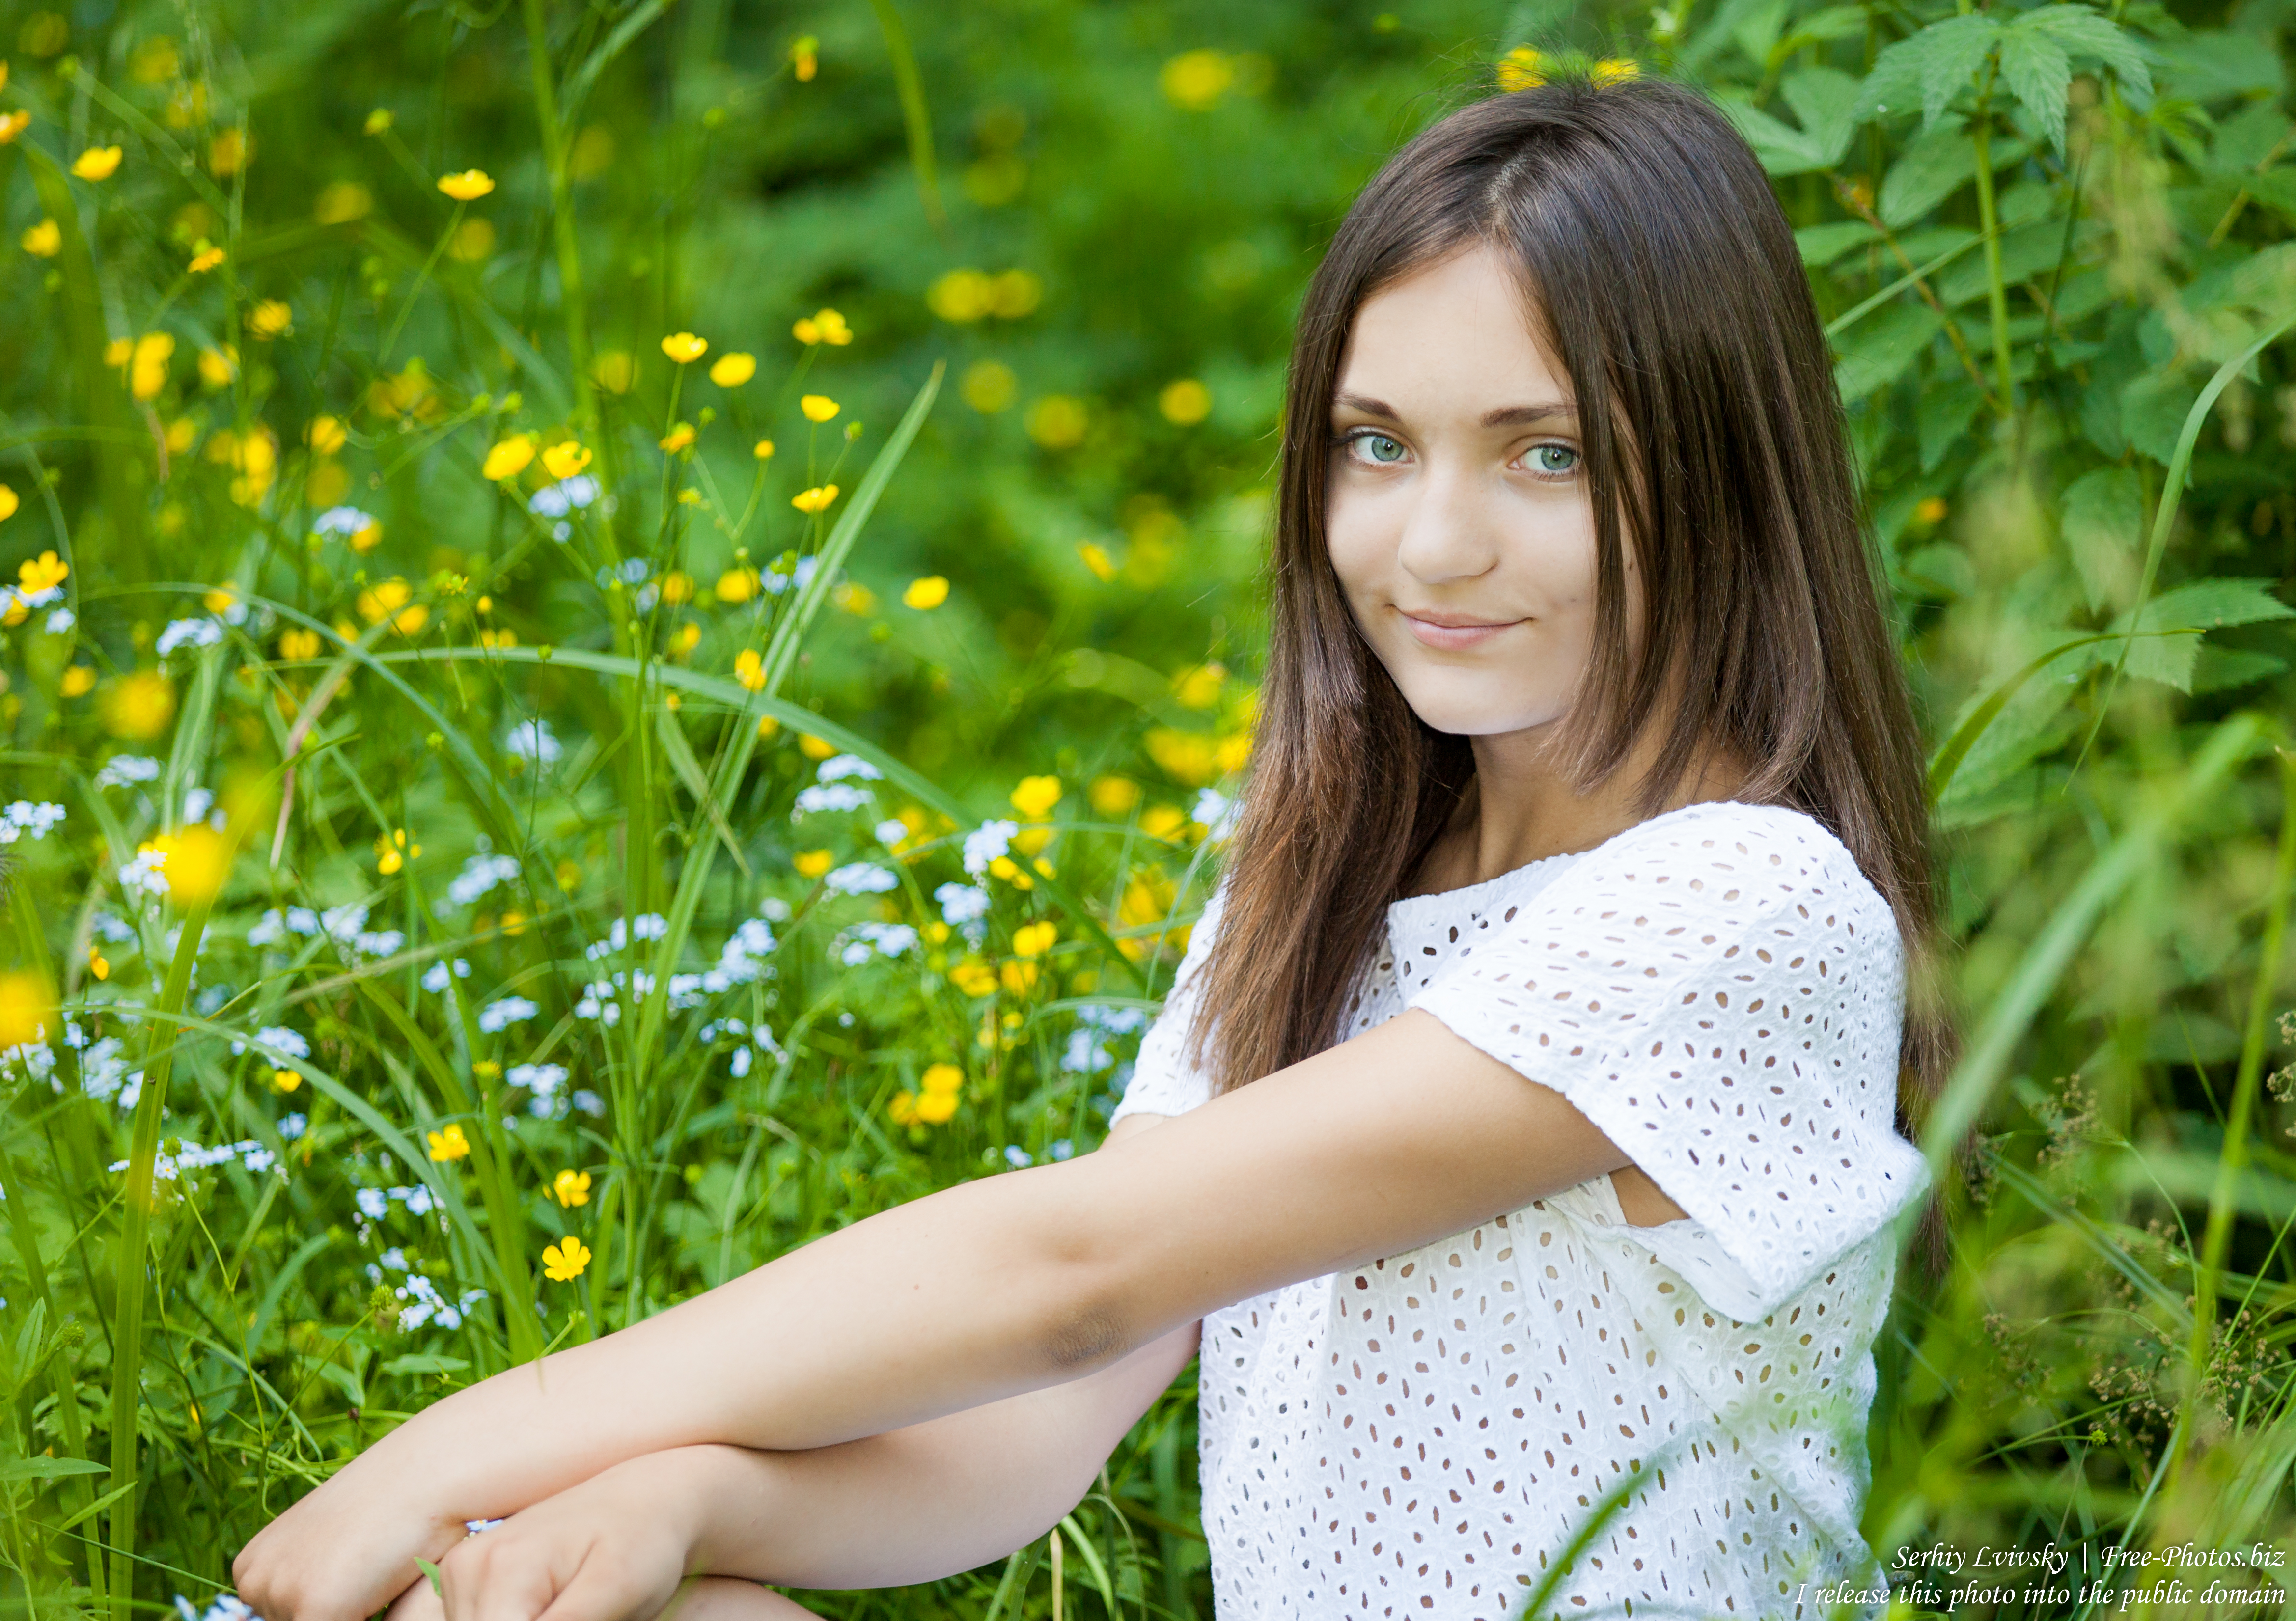 New free photos by RSS. a brunette 14-year-old girl photographed in June 20...